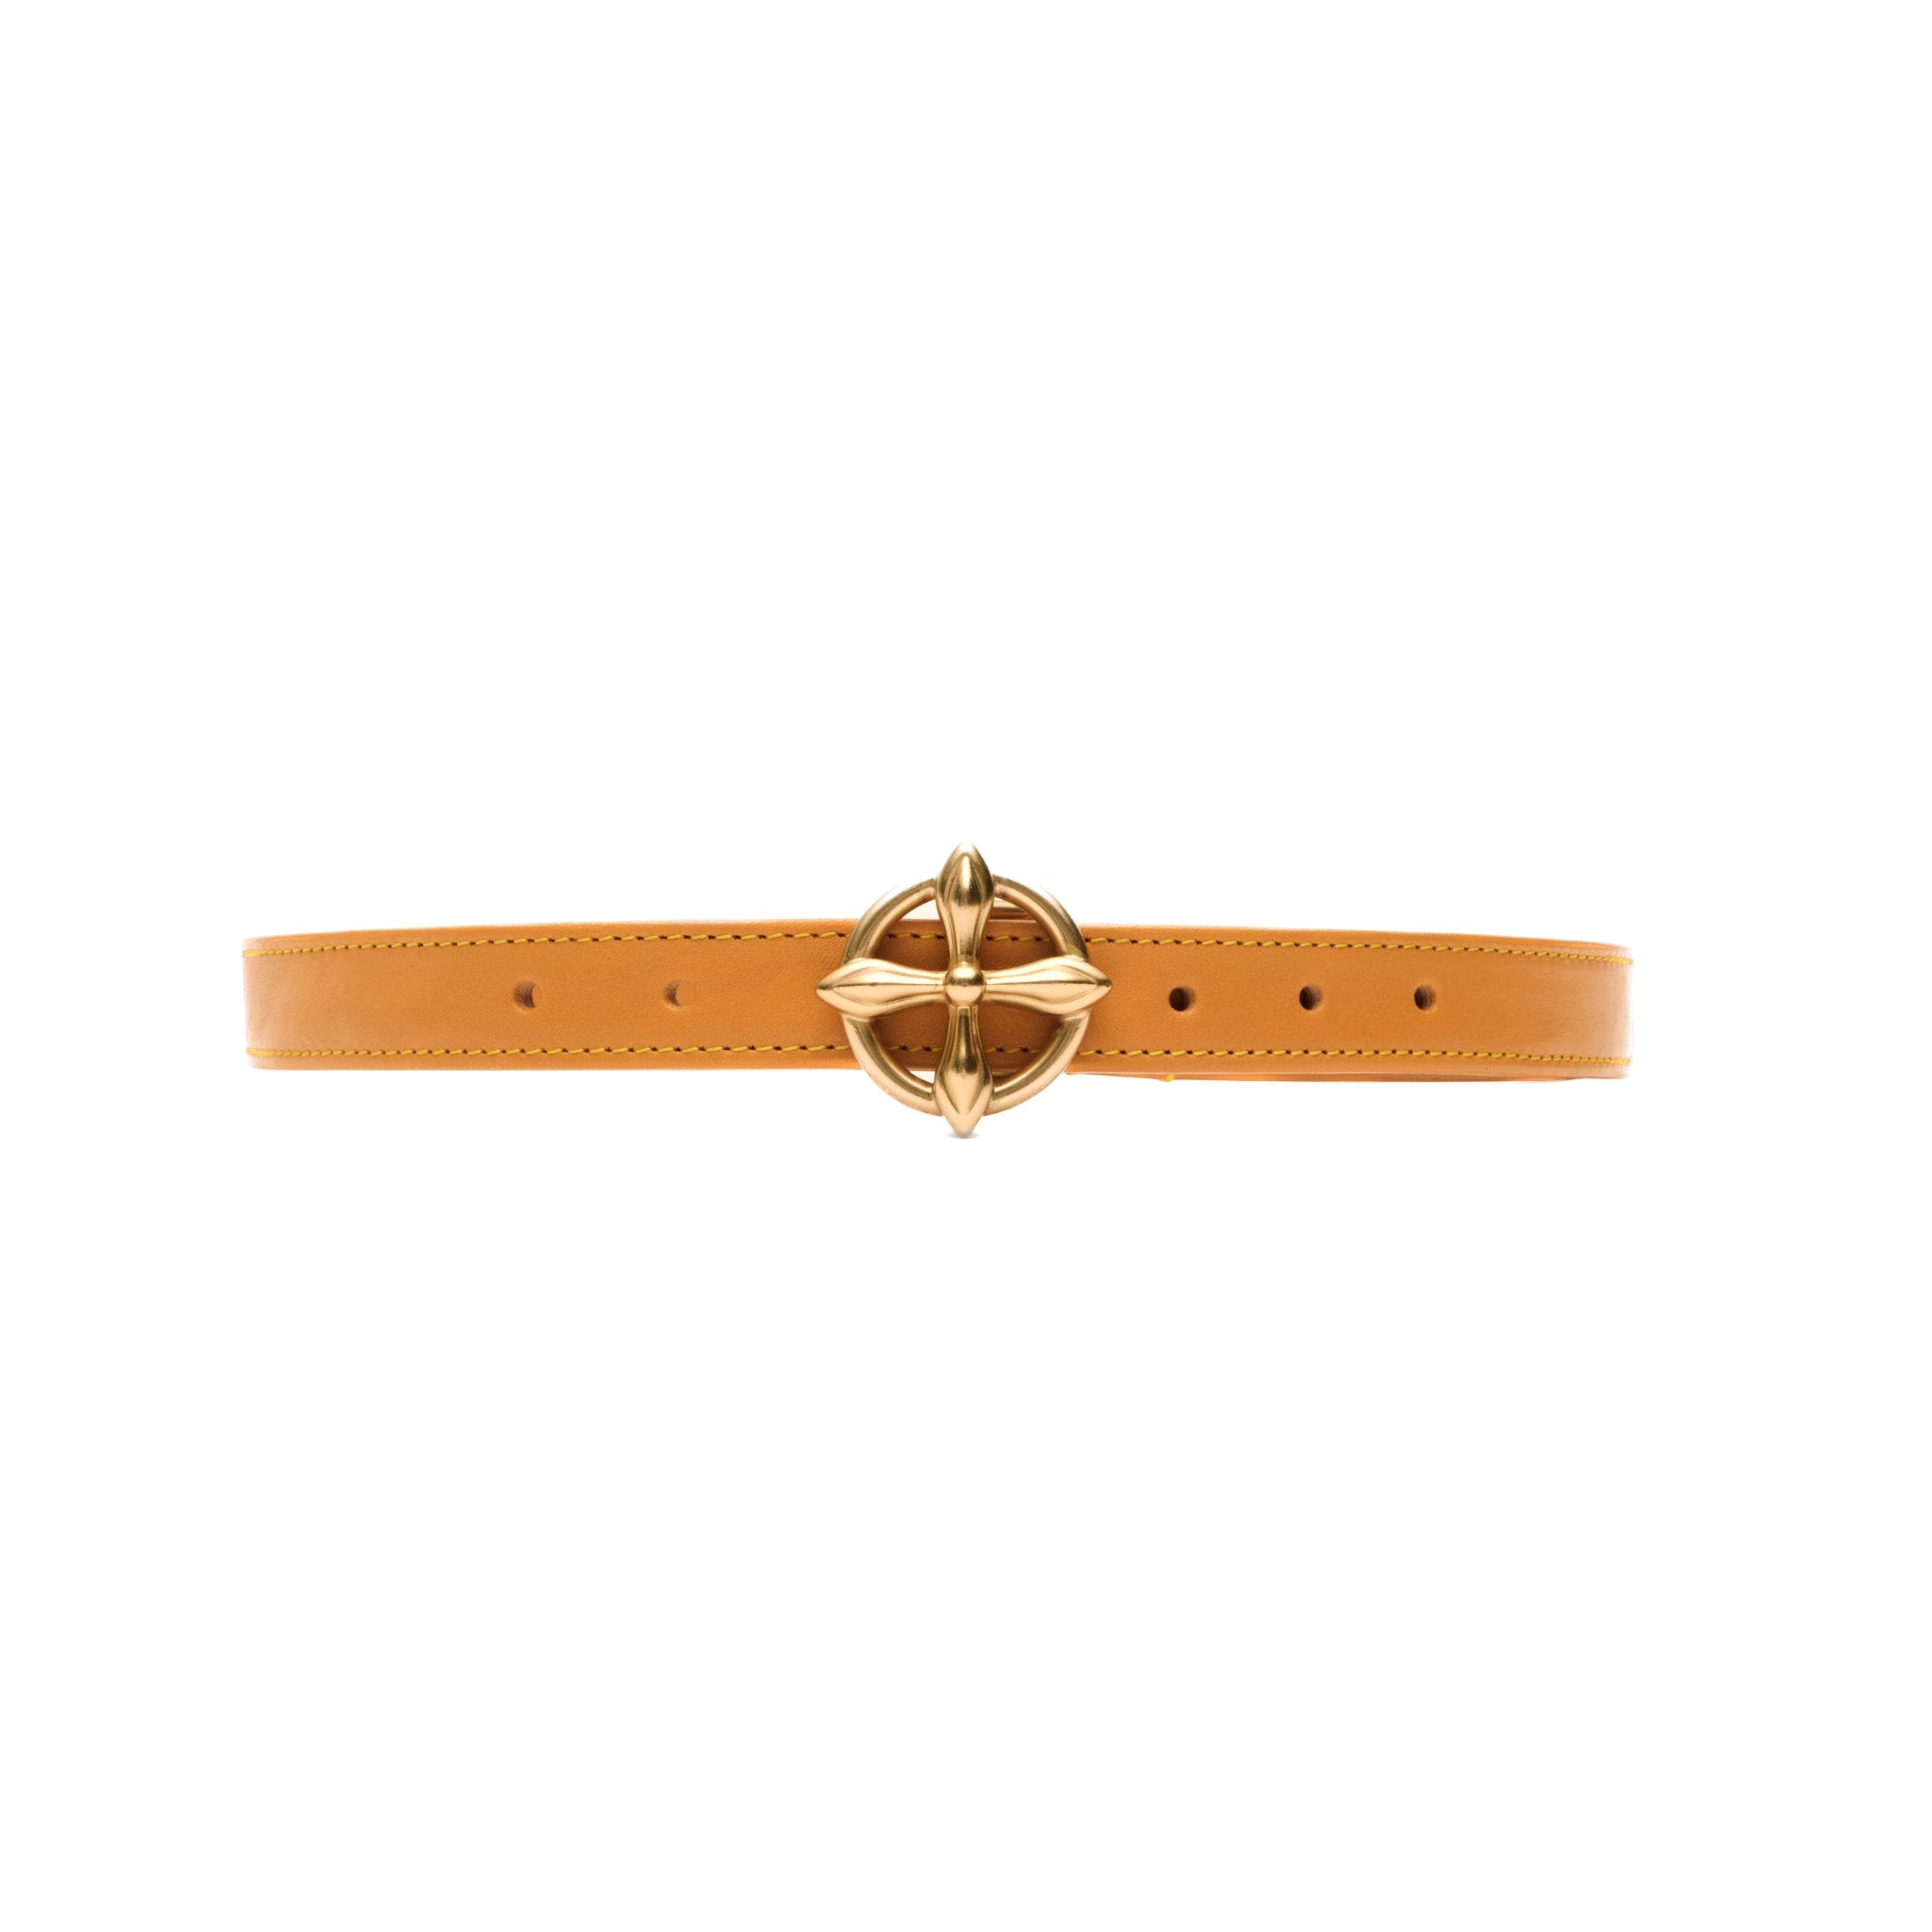 SMFK Compass Handcraft Leather Belt | MADA IN CHINA